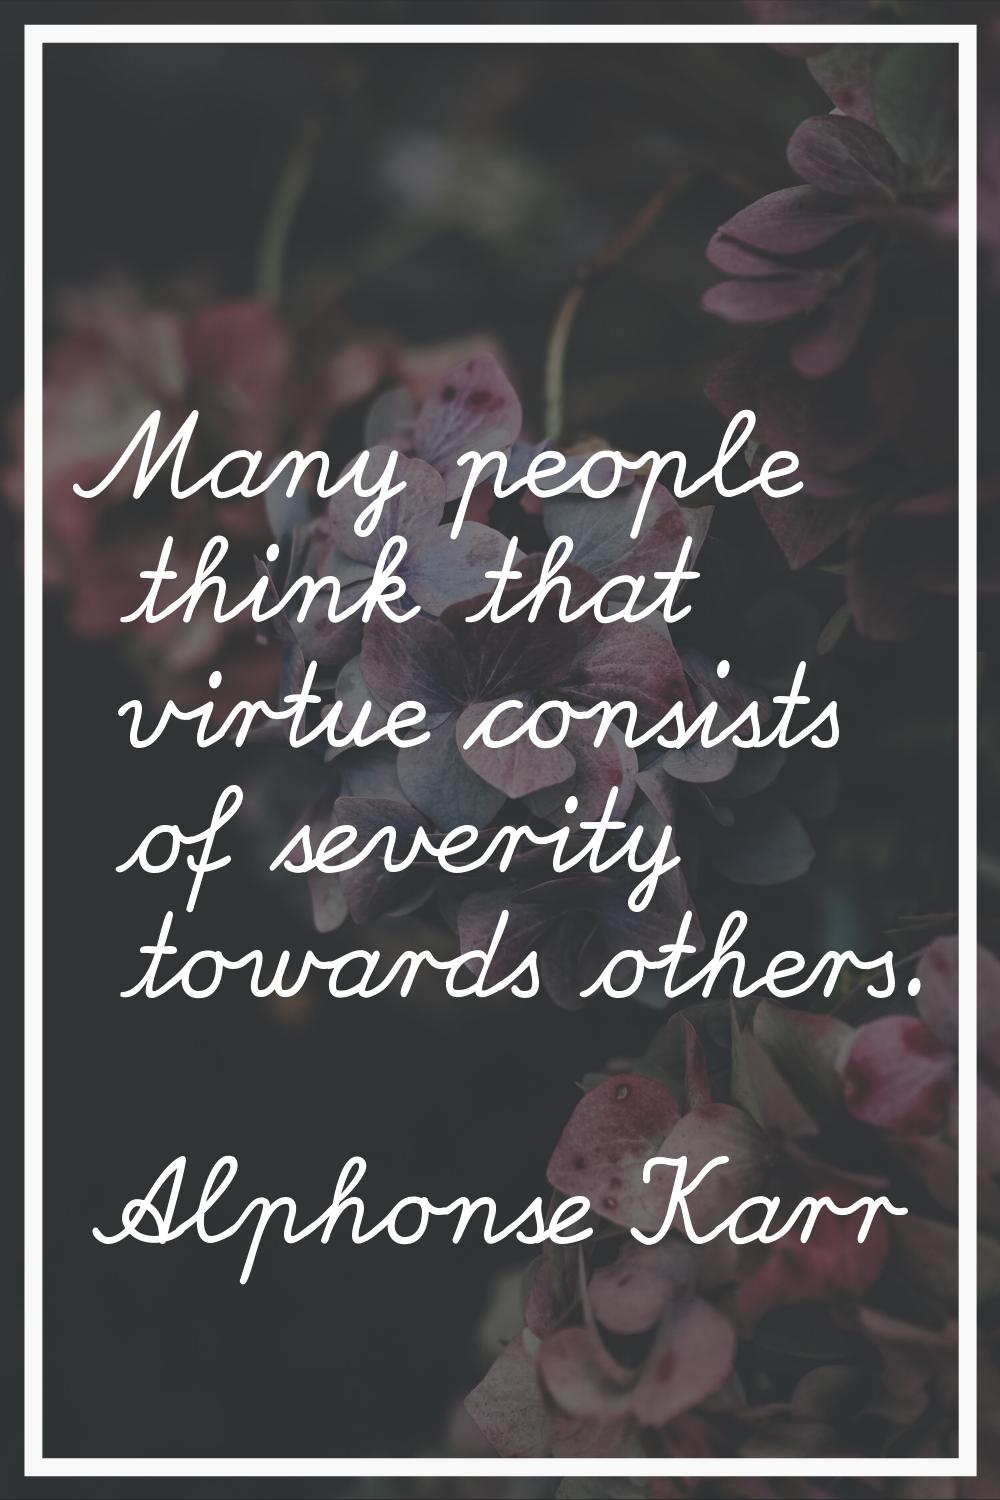 Many people think that virtue consists of severity towards others.